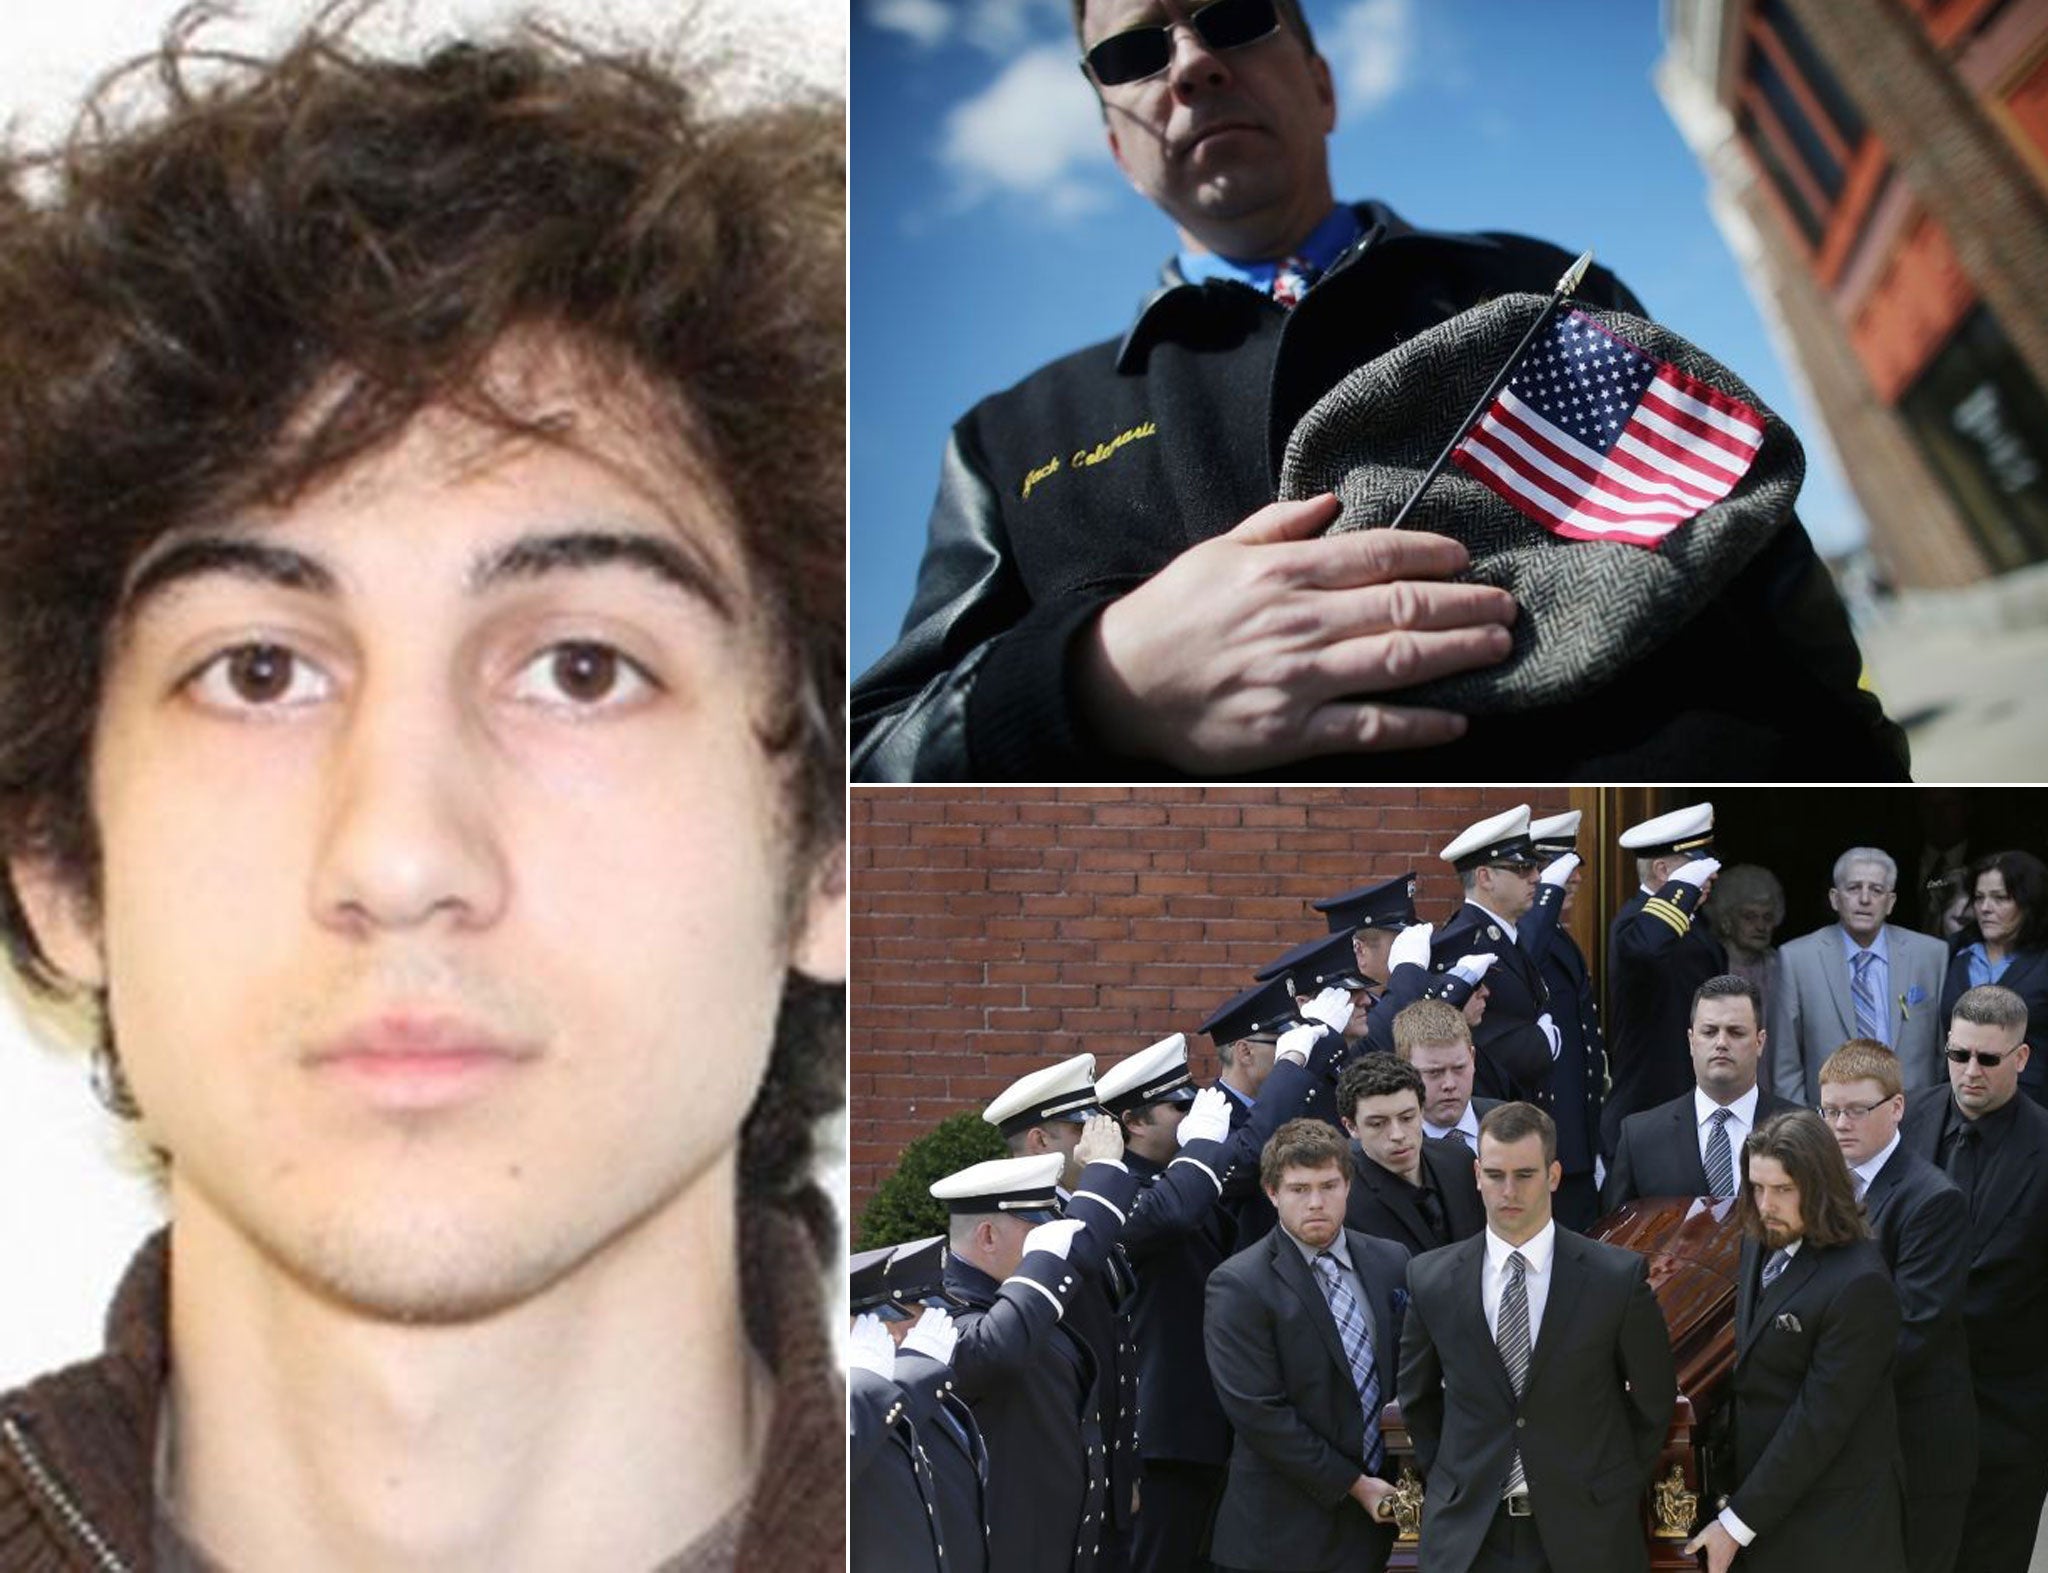 Boston bombing suspect Dzhokhar Tsaraev (main image) was charged by US federal prosecutors, on the same day that Boston laid to rest his alleged first victim, Krystle Campbell